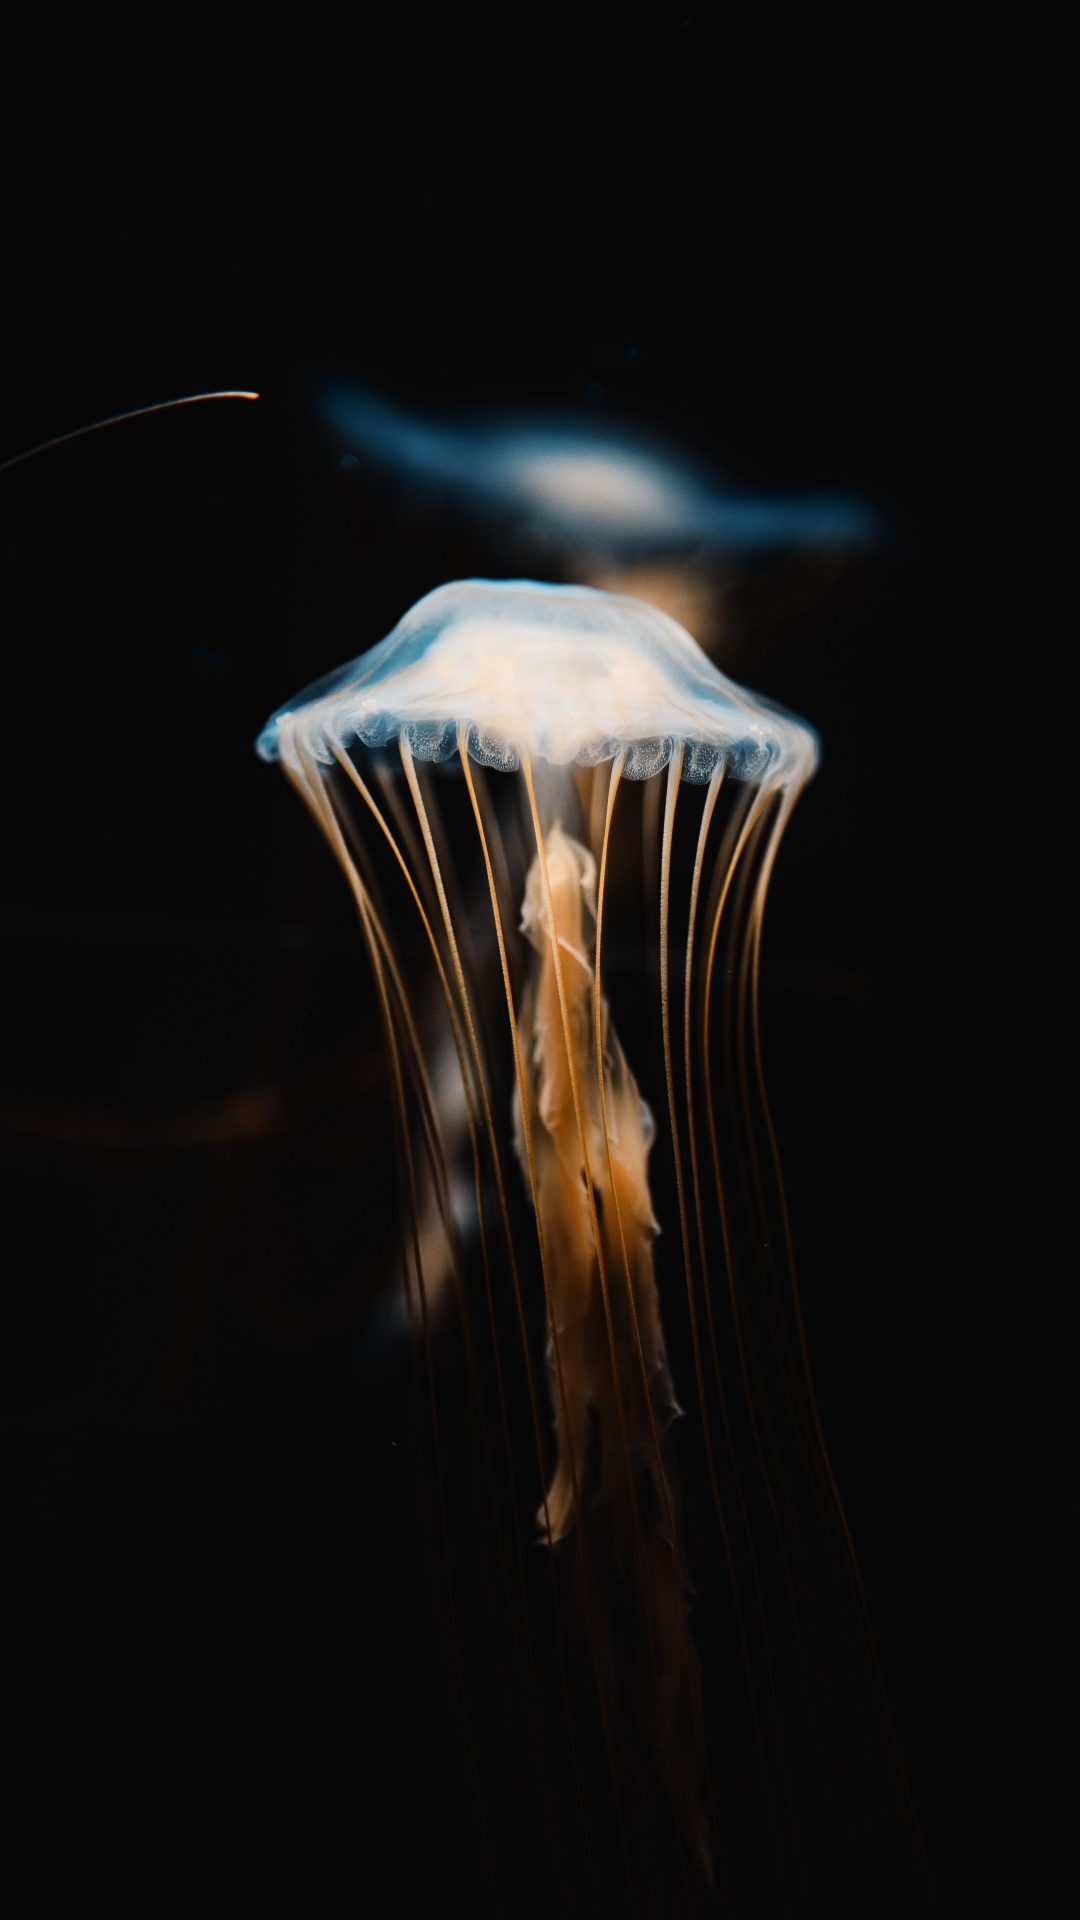 Blue and White Jellyfish in Dark Room. Wallpaper in 1080x1920 Resolution